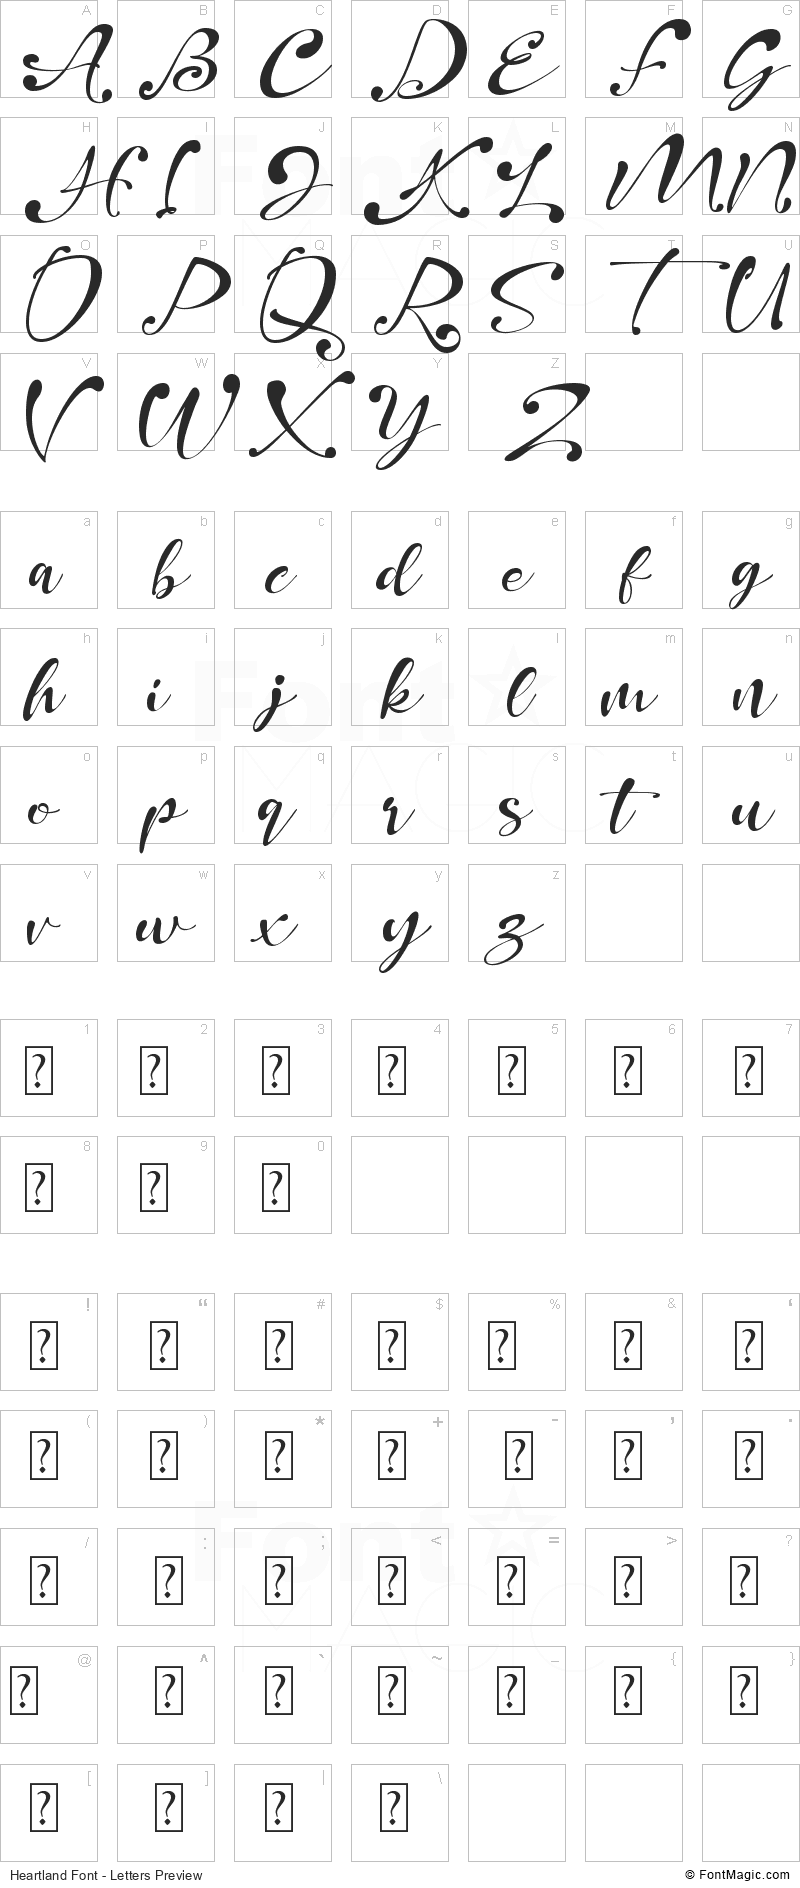 Heartland Font - All Latters Preview Chart